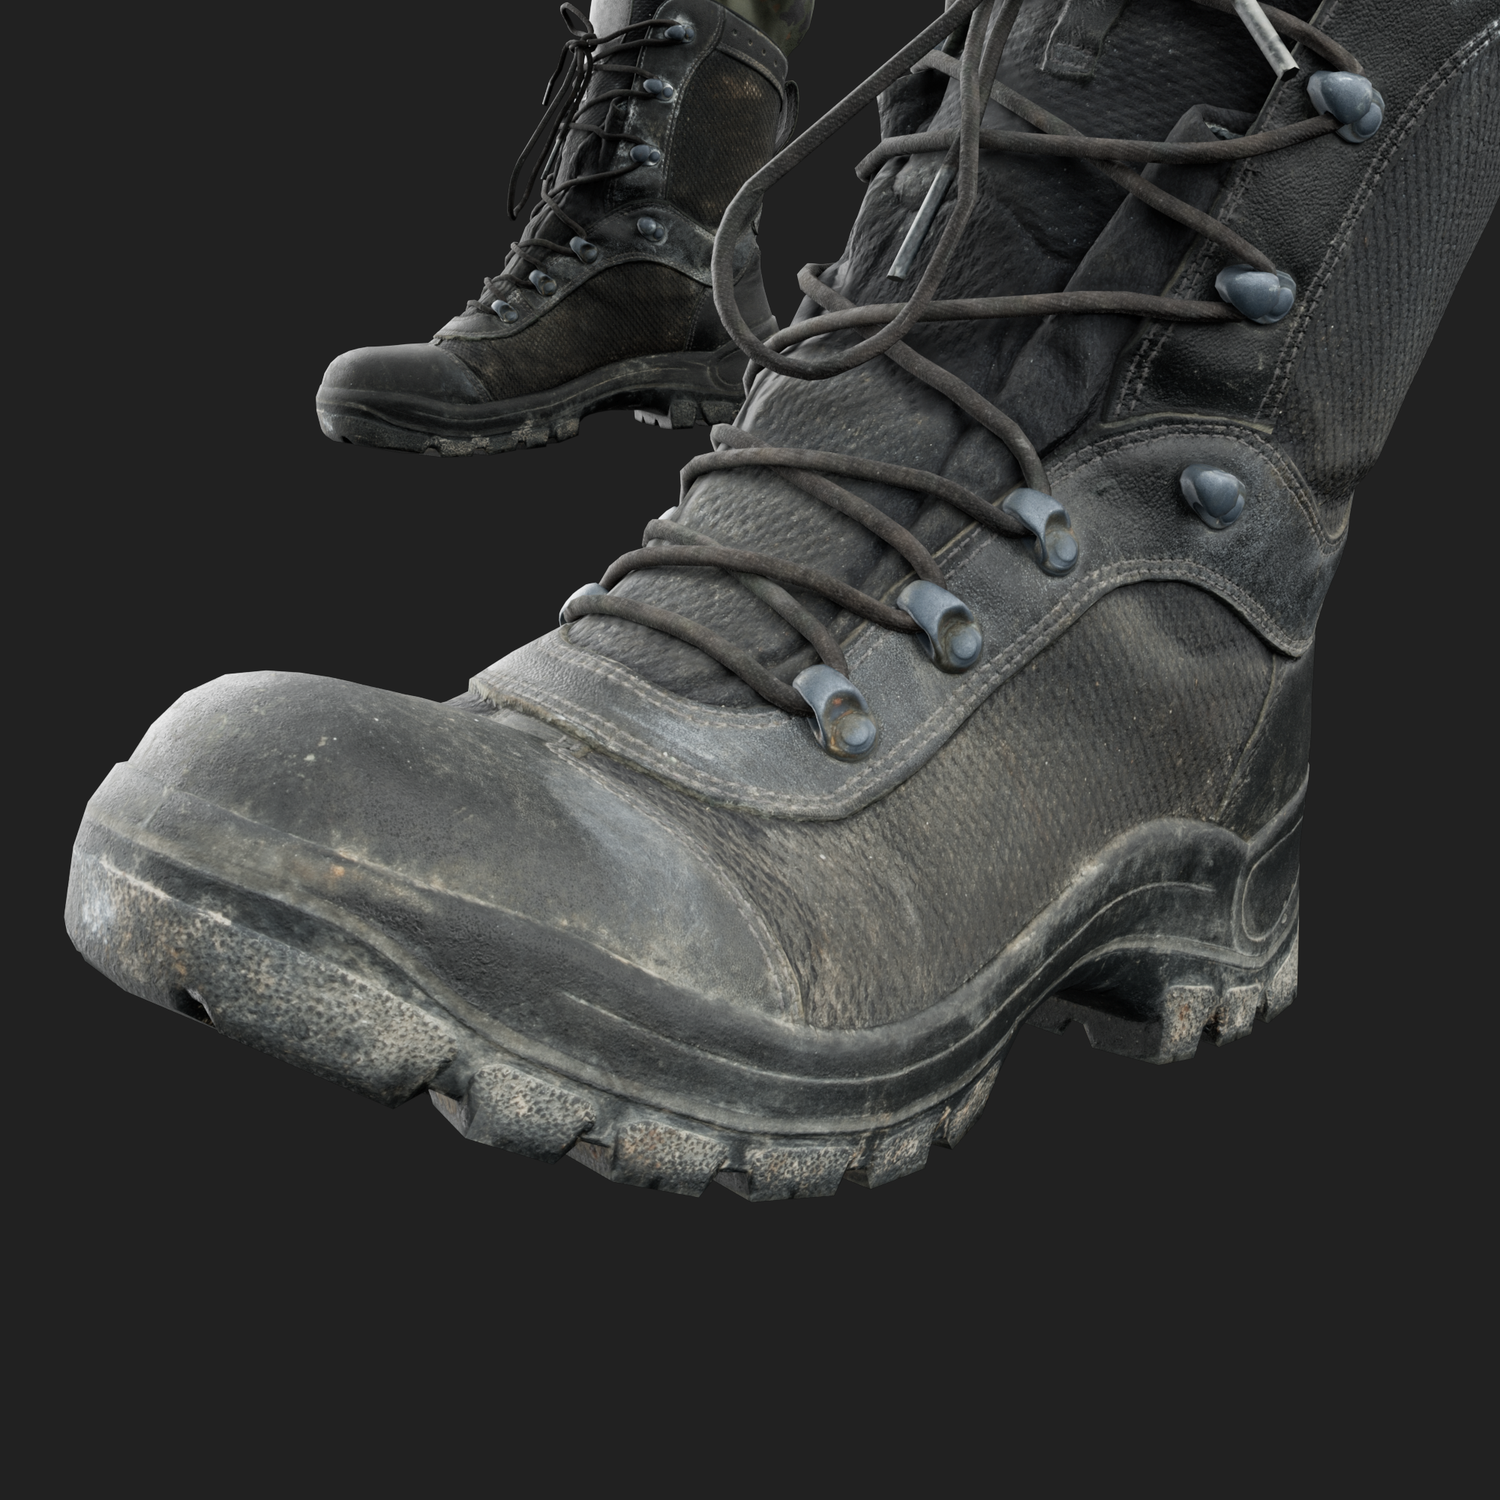 Realistic rendering of a 3D model male Military Boots - front detail view